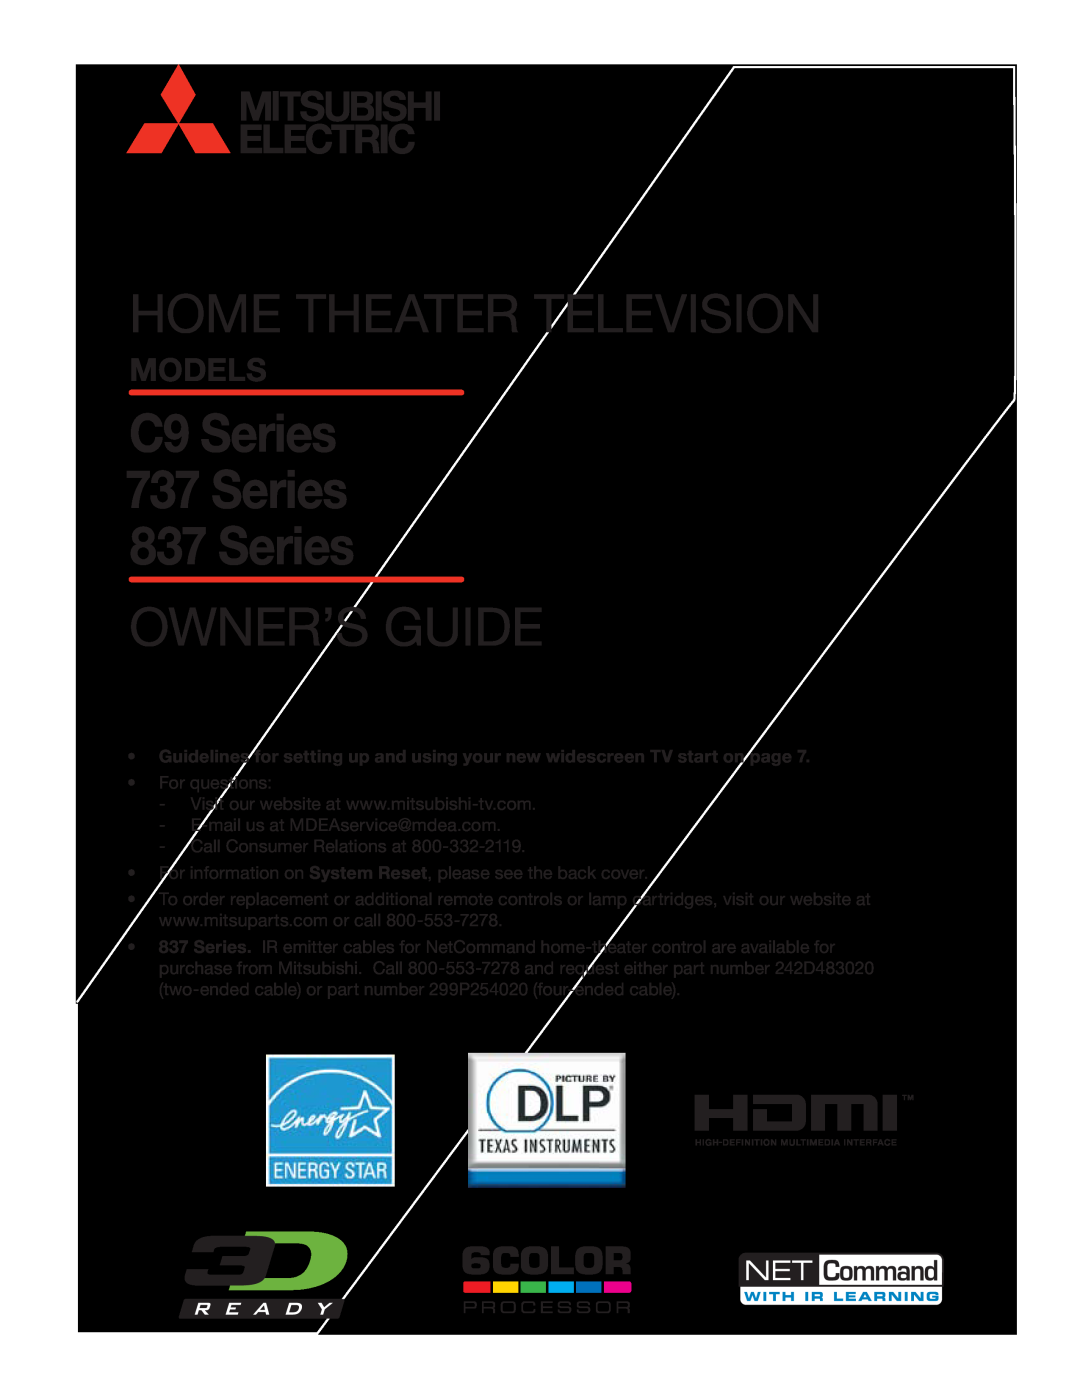 Mitsubishi Electronics manual Models, Home Theater Television, C9 Series 737Series 837 Series, Owner’S Guide 